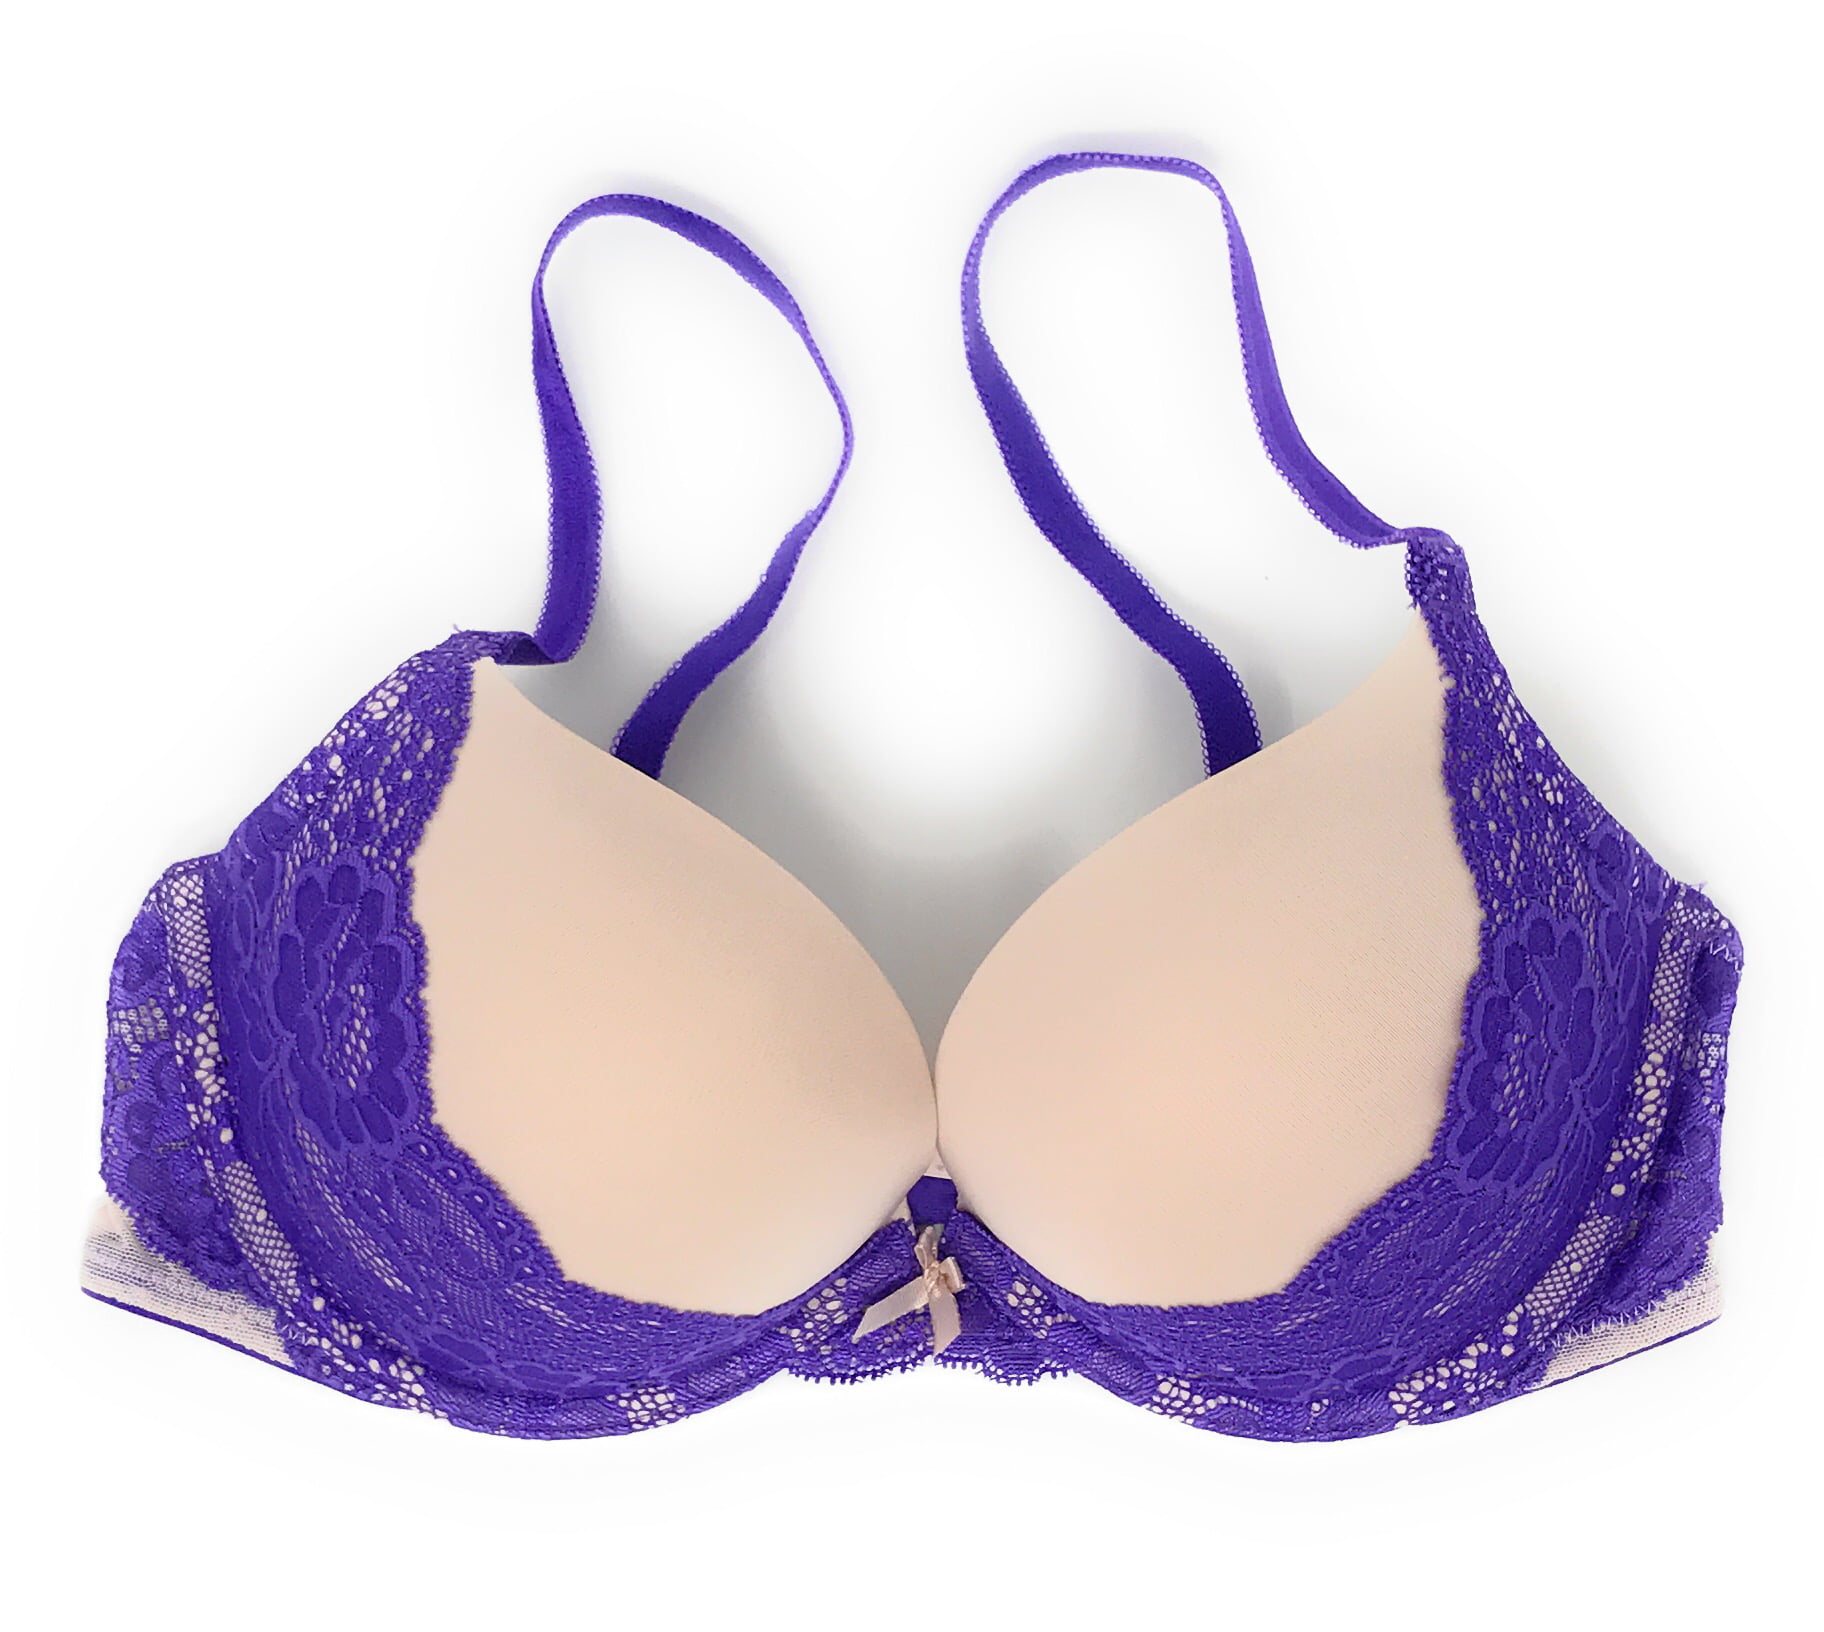 Victoria's Secret So Obsessed Push Up Bra 332186 Purple Size 34C Add 1 1/2  cup size